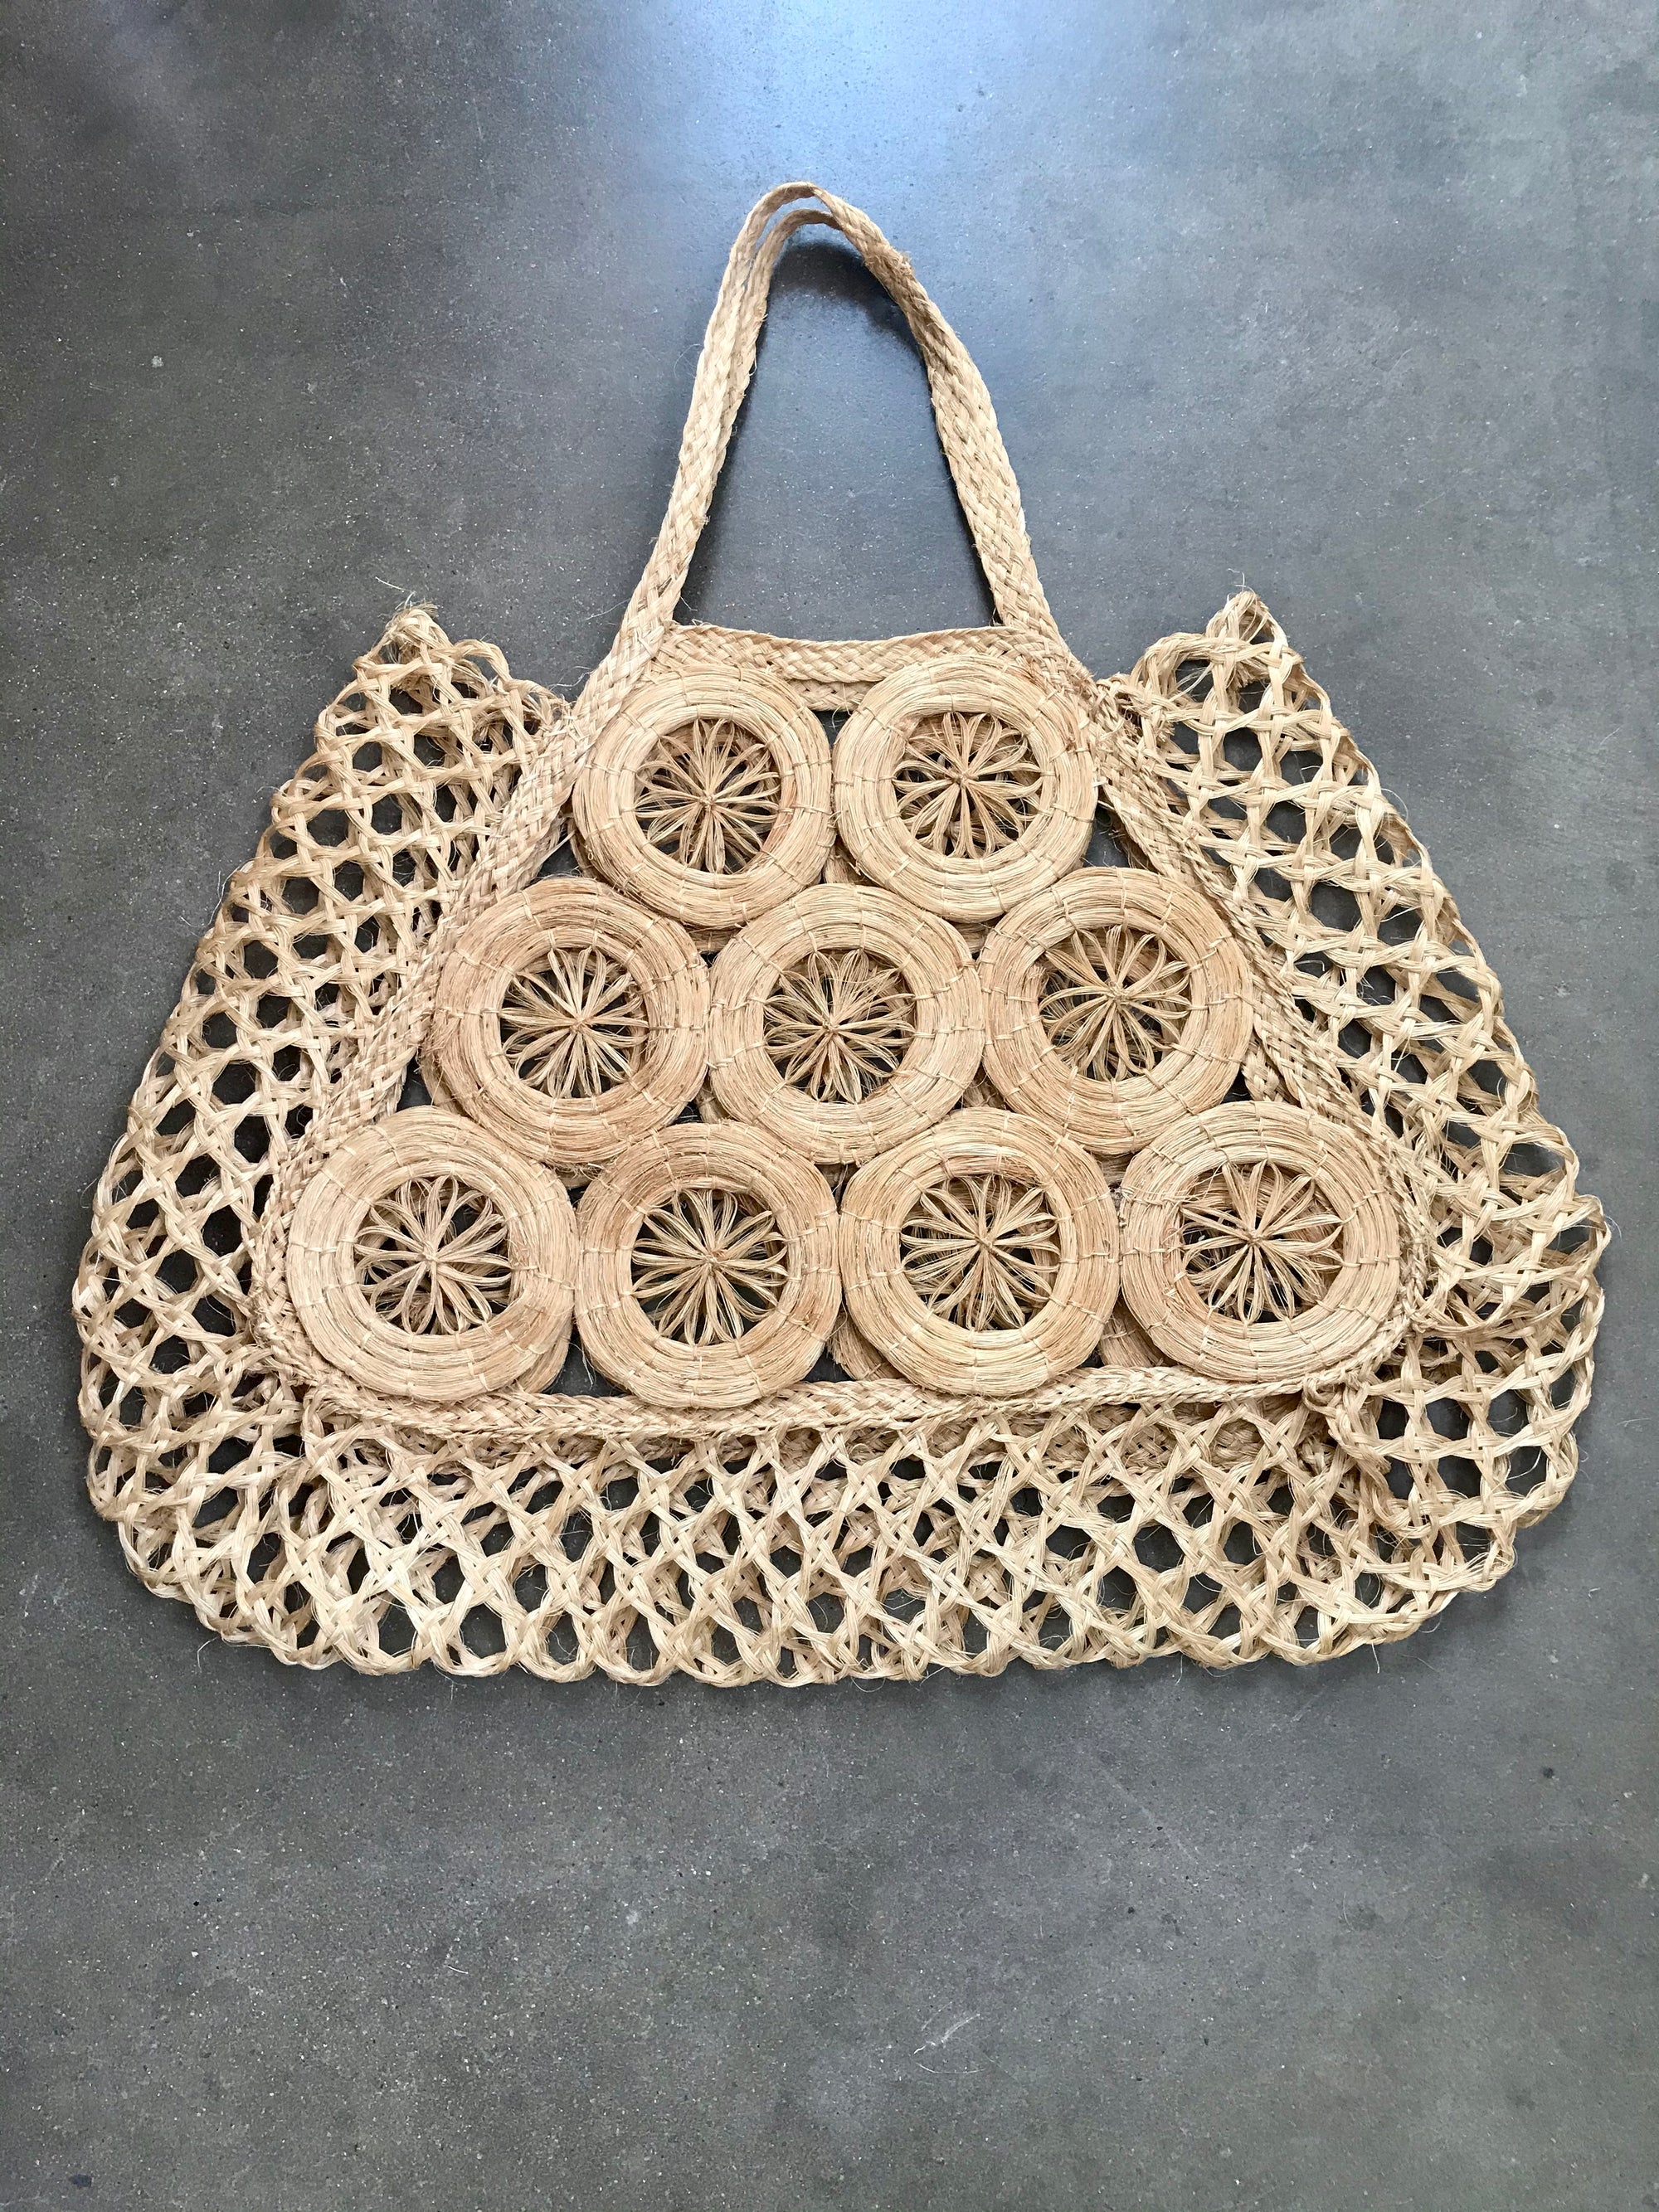 Vintage Hand-Woven Straw Tote